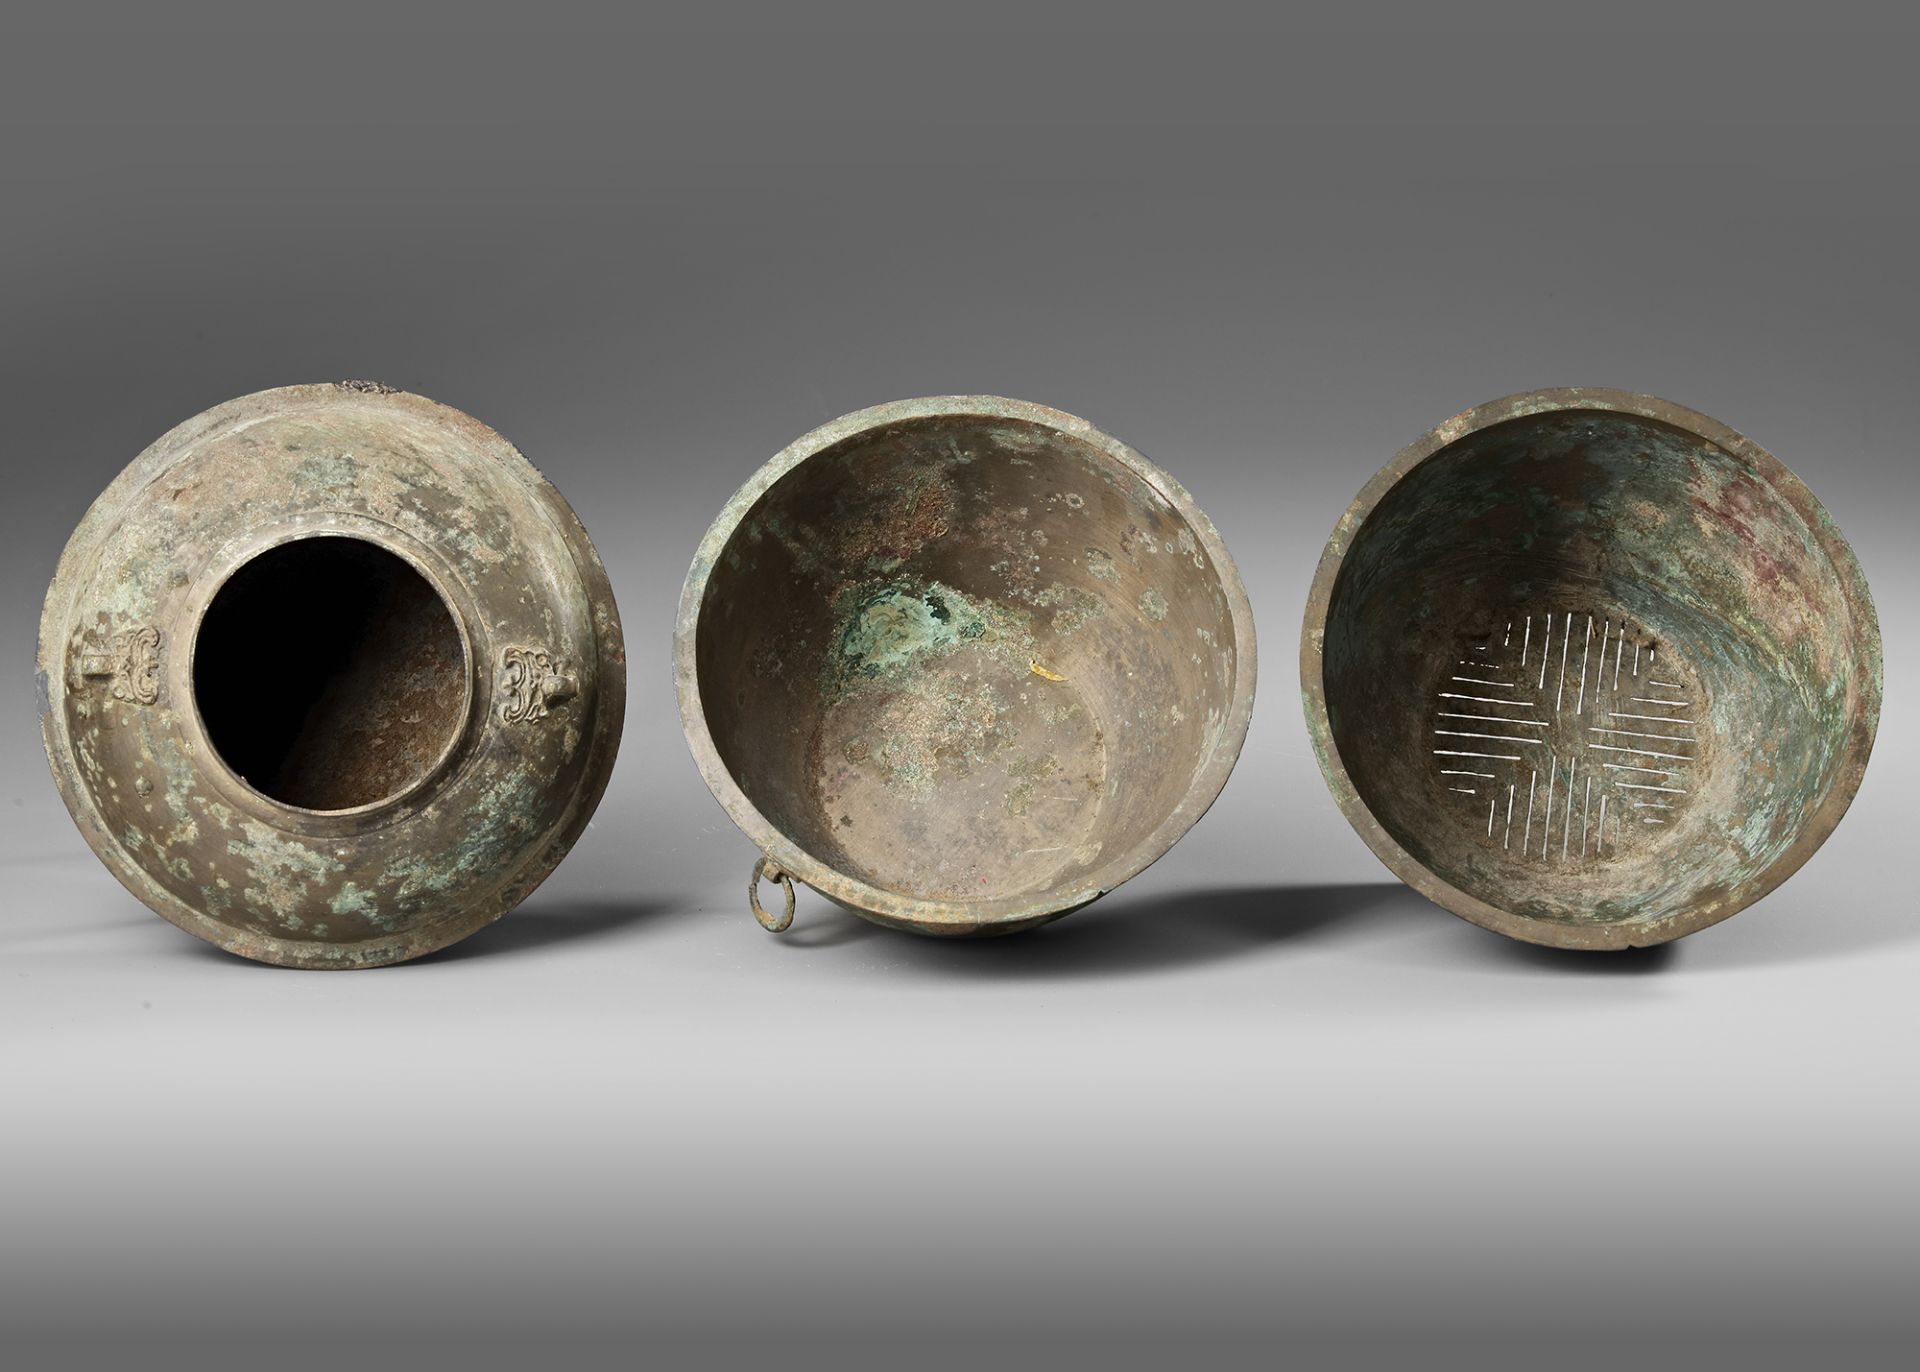 A CHINESE 3 PARTS STEAMER, HAN DYNASTY (206 BC-220 AD) - Image 6 of 8